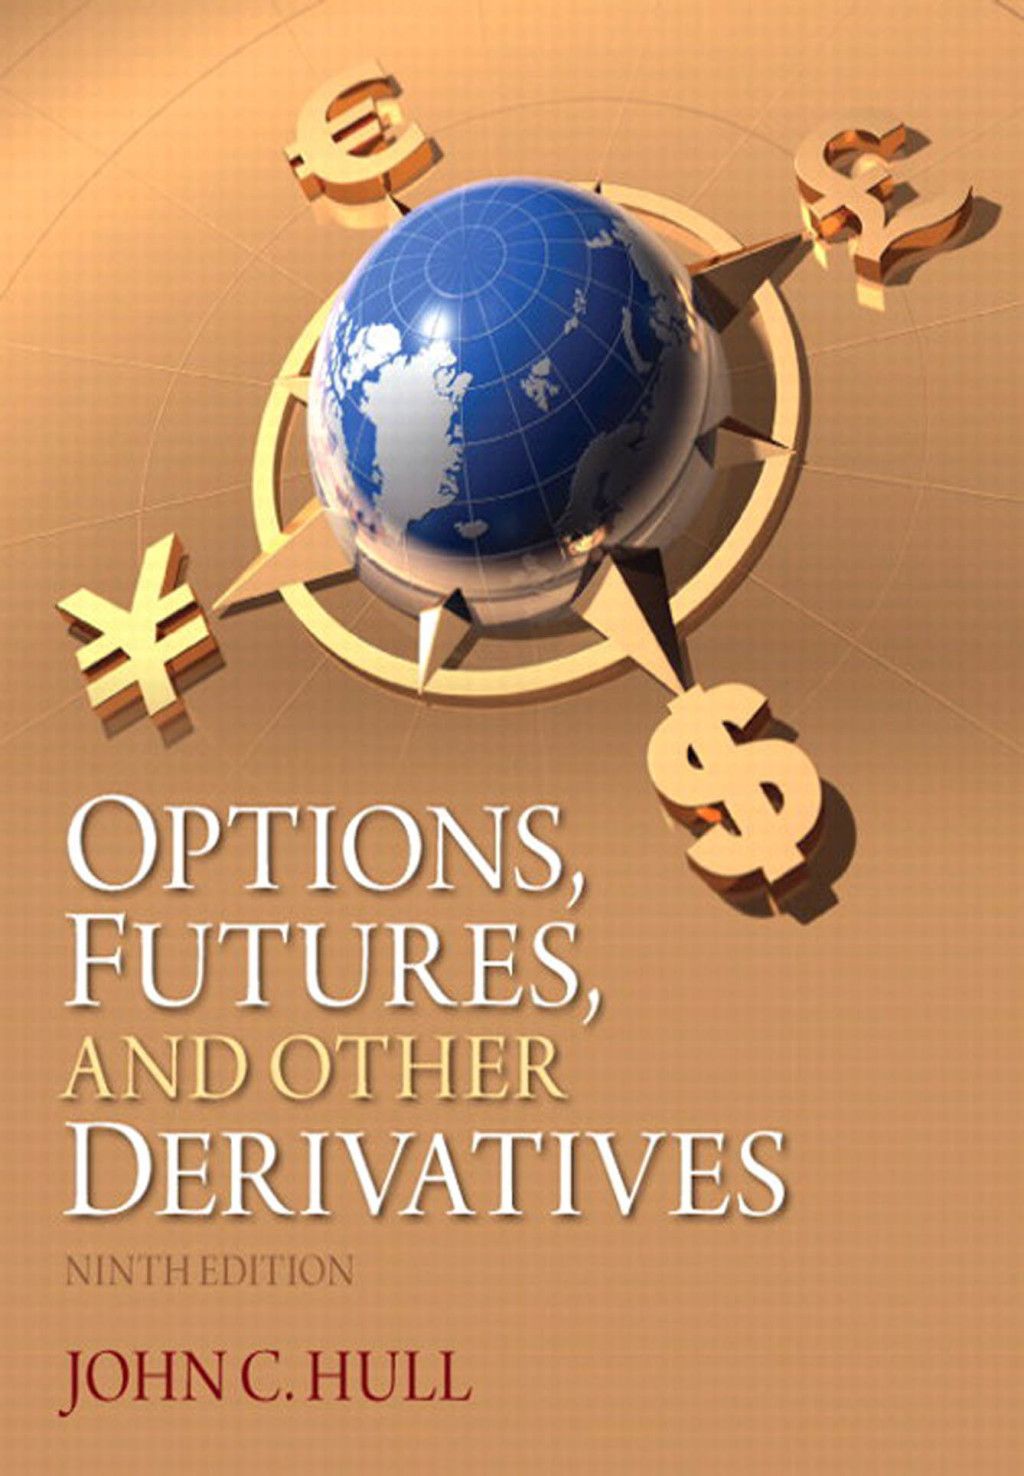 Options Futures and other Derivatives 9th Edition PDF Download Knowdemia